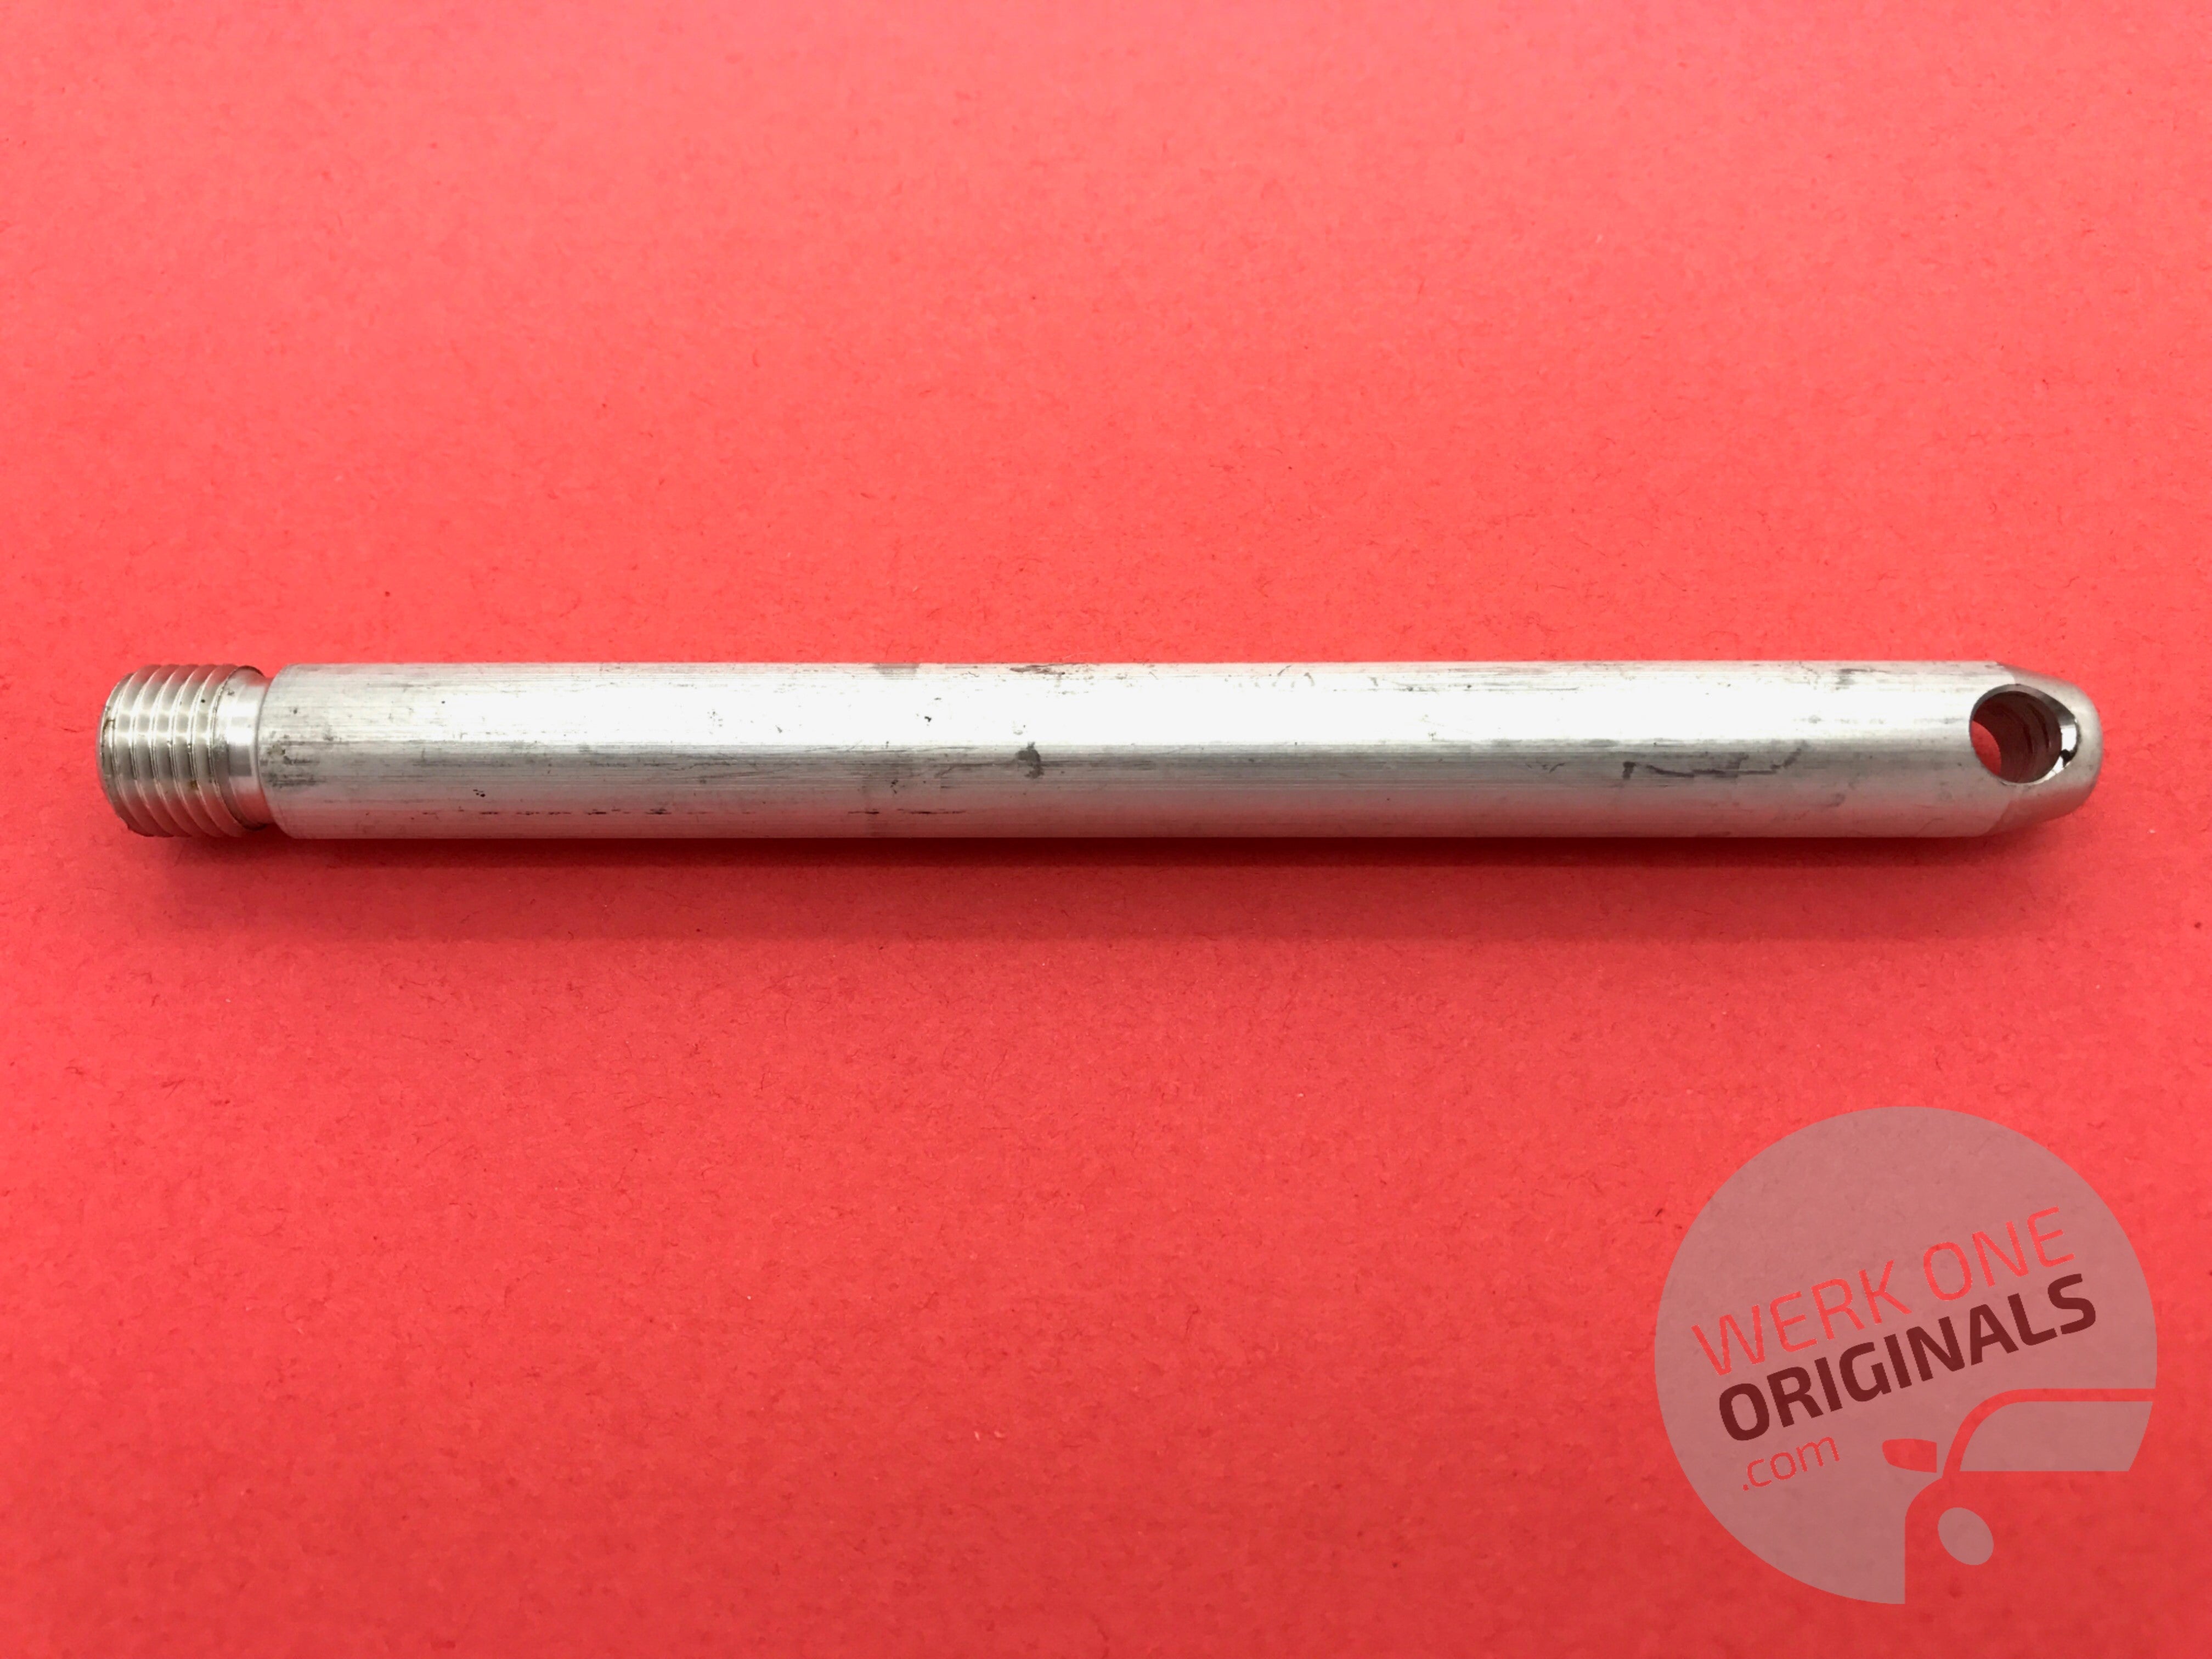 Porsche Official Wheel Removal Tool for 911 Type 997 Models